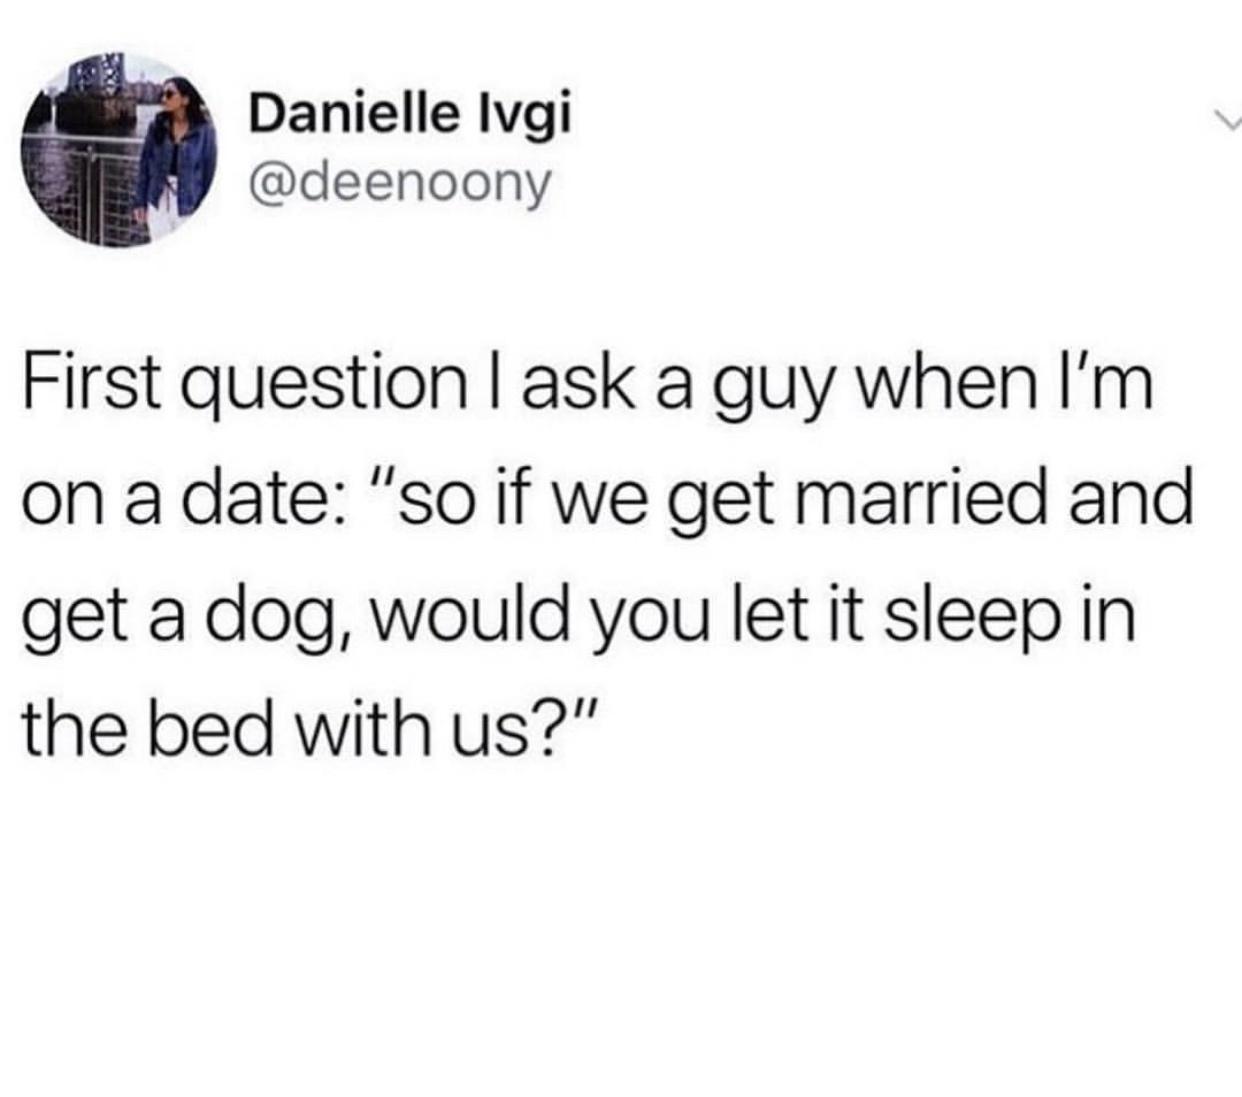 cv memes - Danielle Ivgi First question I ask a guy when I'm on a date "so if we get married and get a dog, would you let it sleep in the bed with us?"